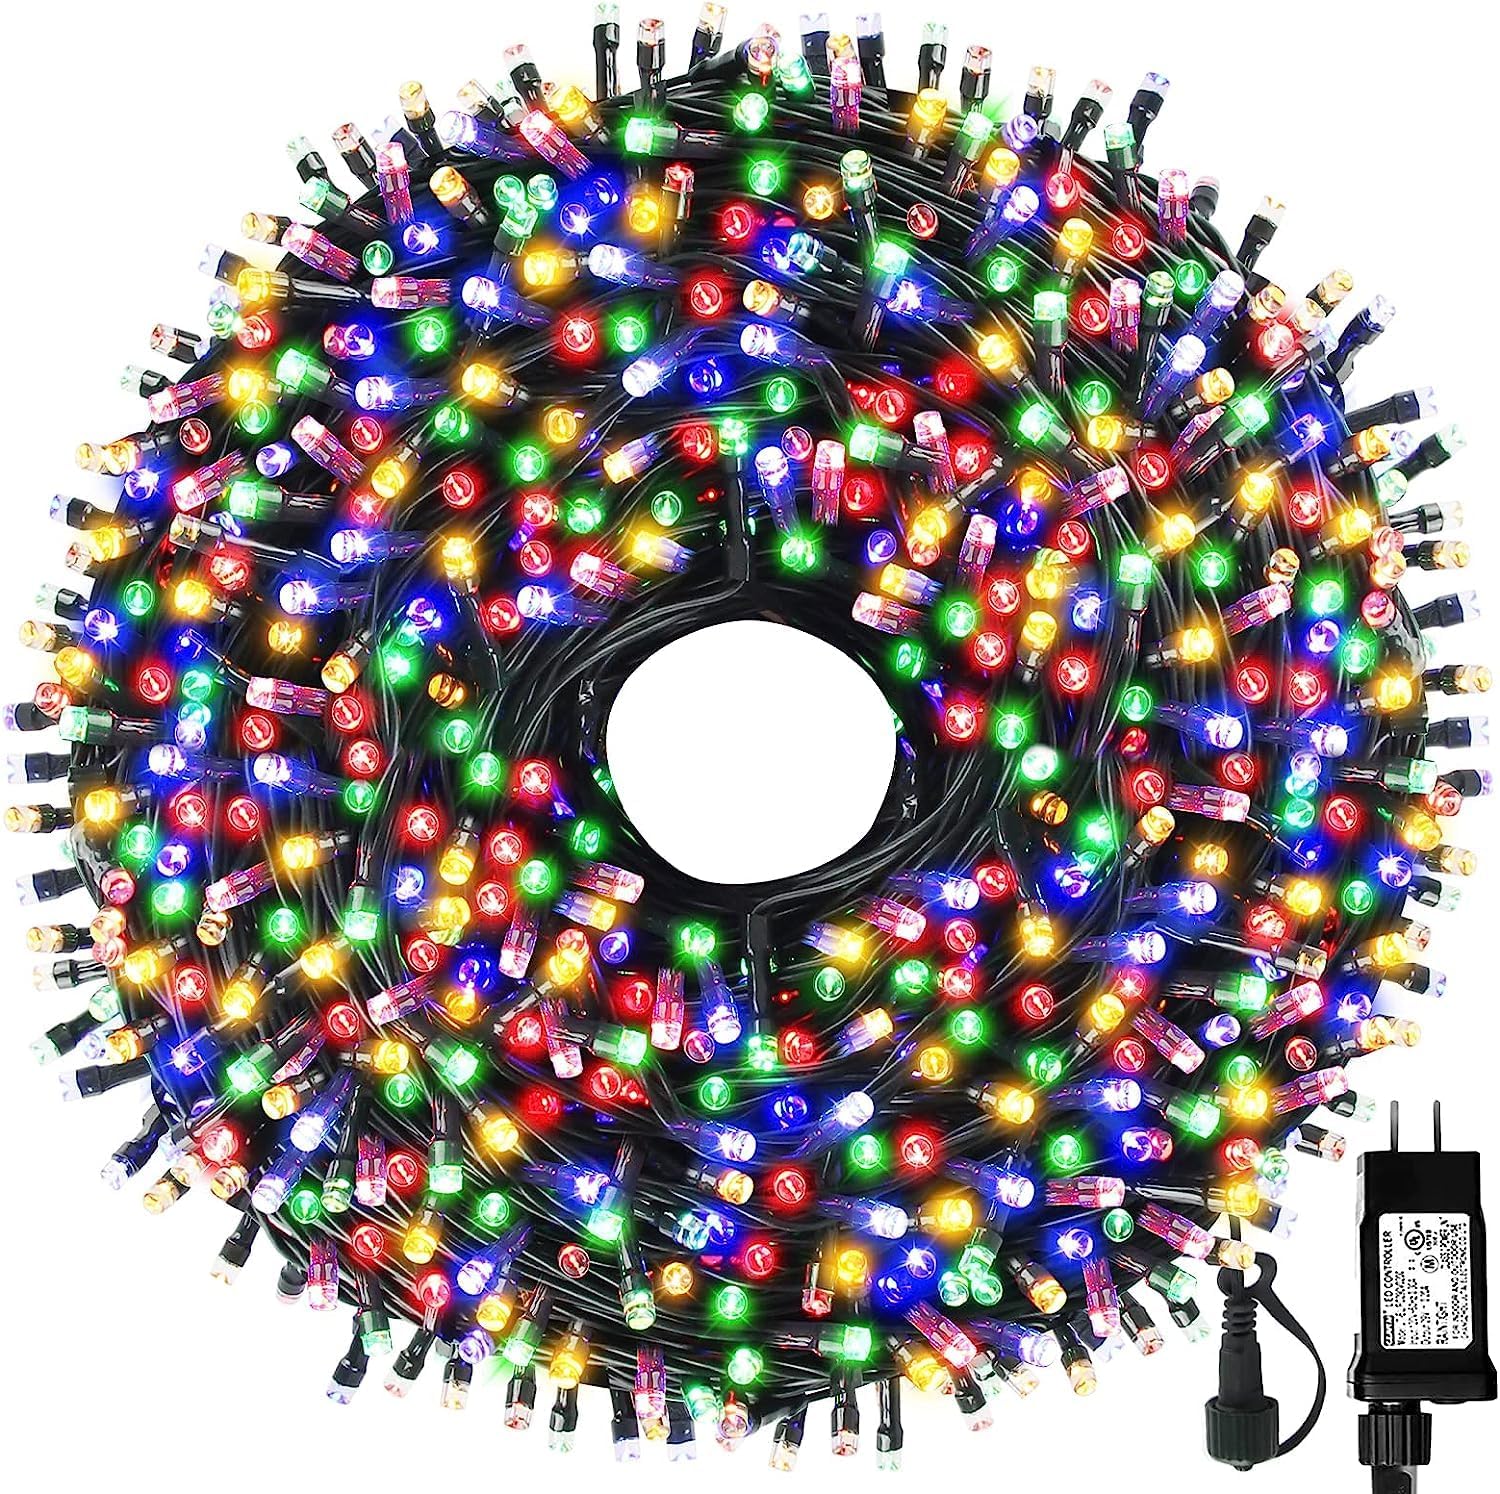 MZD8391 105FT 300LEDs Christmas Lights Outdoor Indoor String Lights 8 Modes Memory Function for Christmas Tree Party Decoration, 100% UL Listed (4 Sets CONNECTABLE) Multi-Color